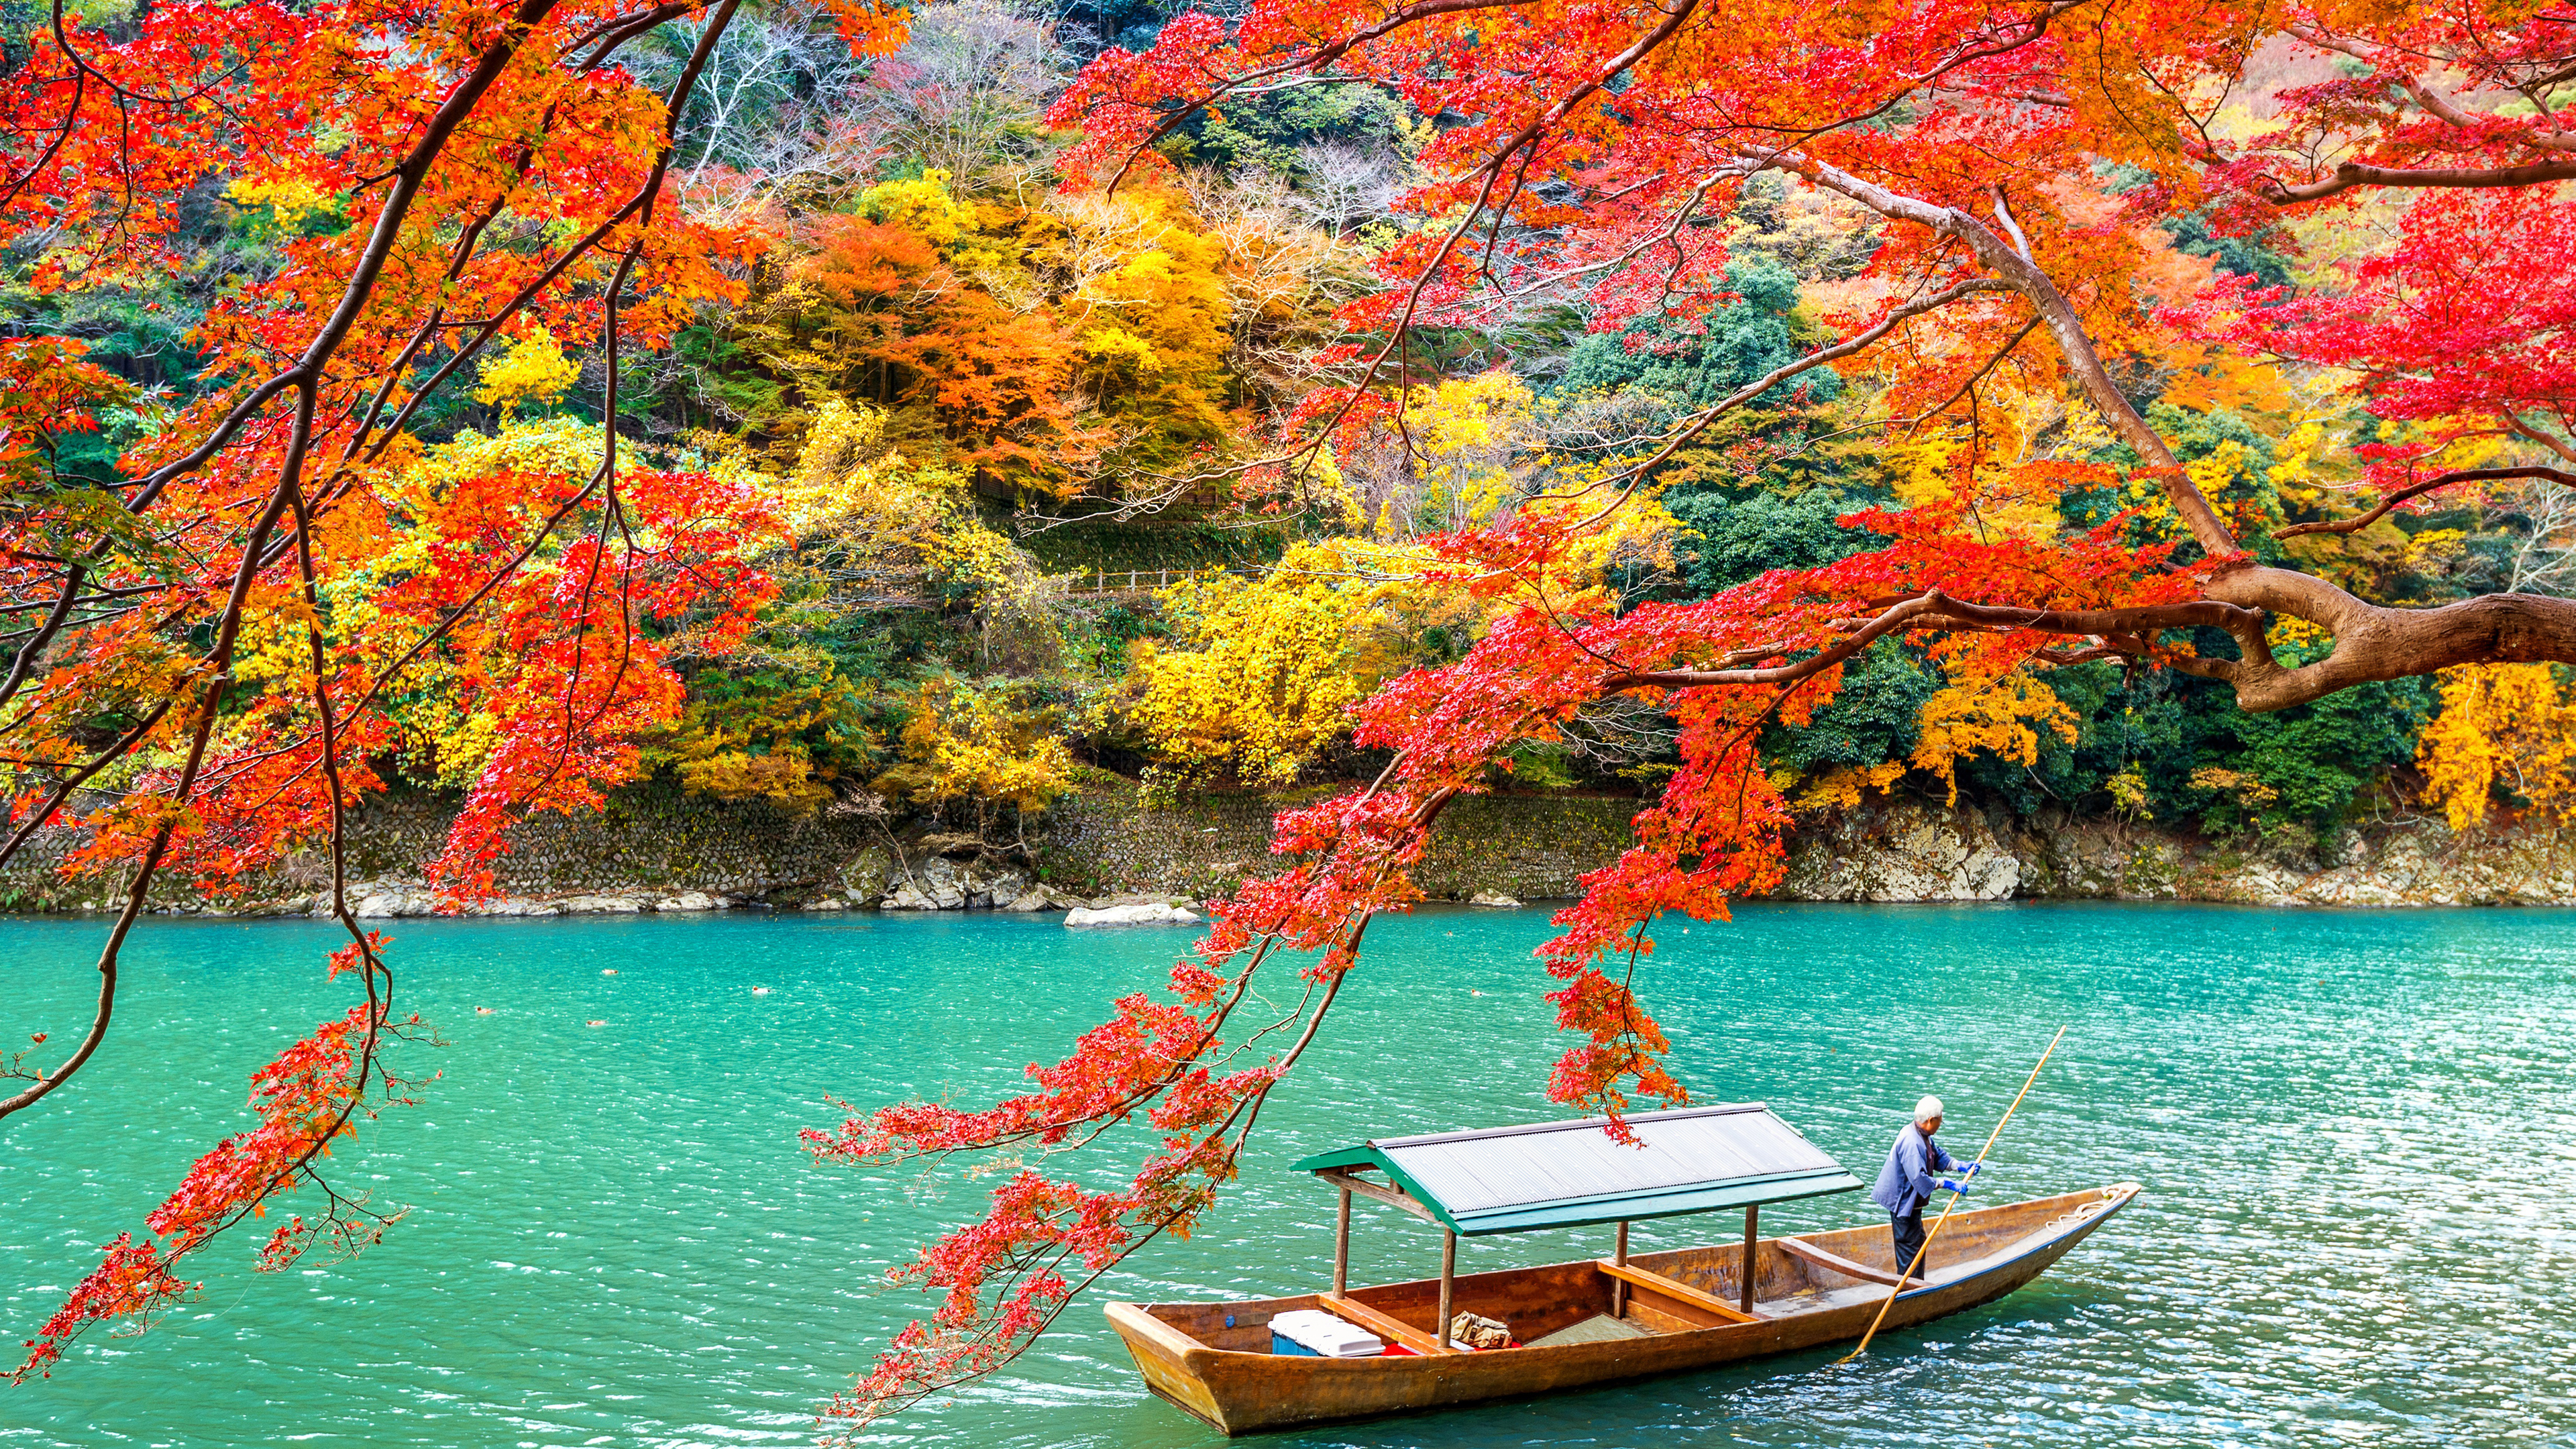 Boat With Man On Body Of Water With Landscape Of Colorful Trees During Daytime K HD Nature